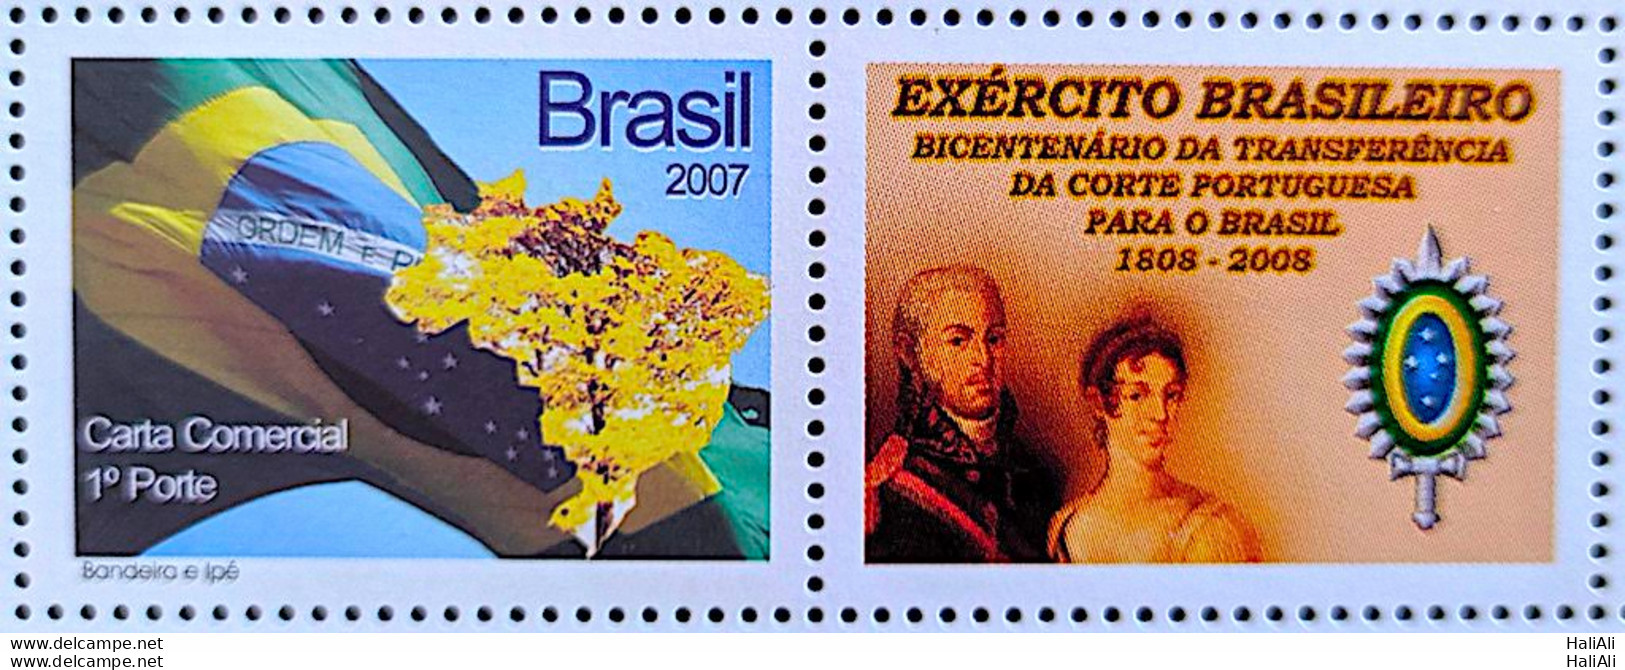 C 2677 Brazil Personalized Stamp Ipe Flag Map 2007 Printed Horizontal Military Army - Personalized Stamps